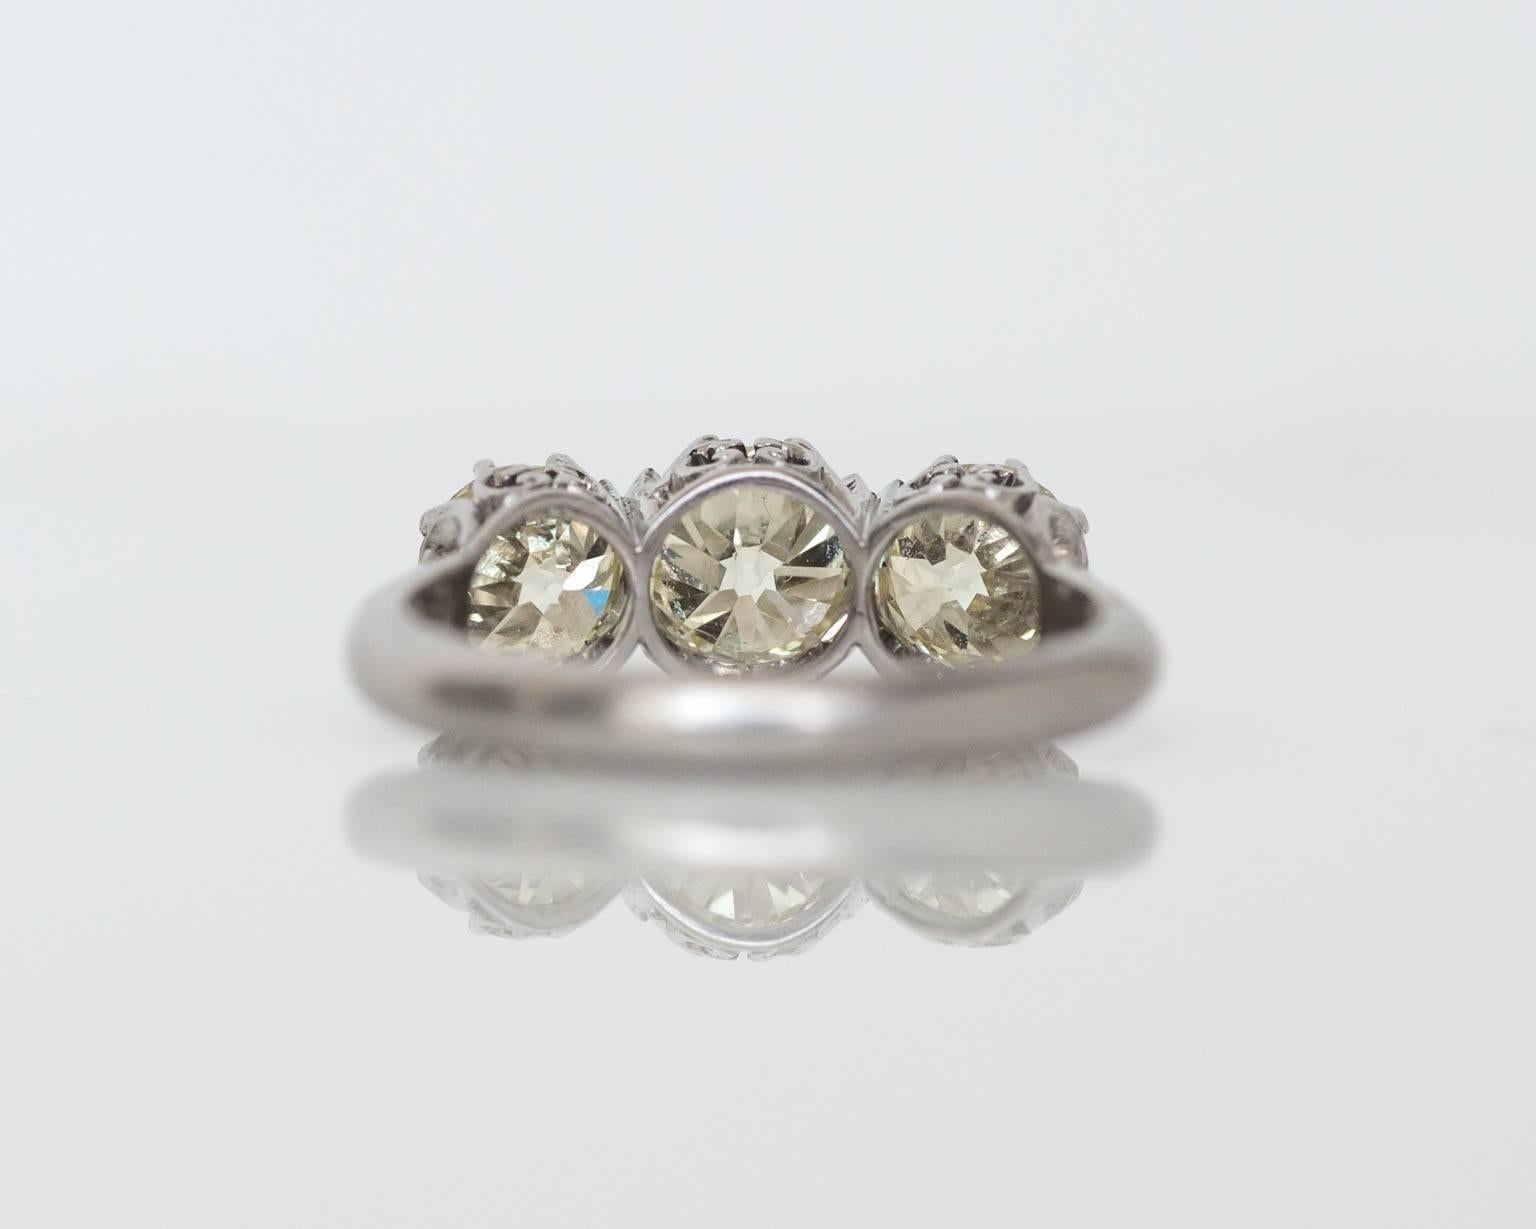 Here is a beautiful and extremely well made true vintage engagement ring. It is signed on the interior 